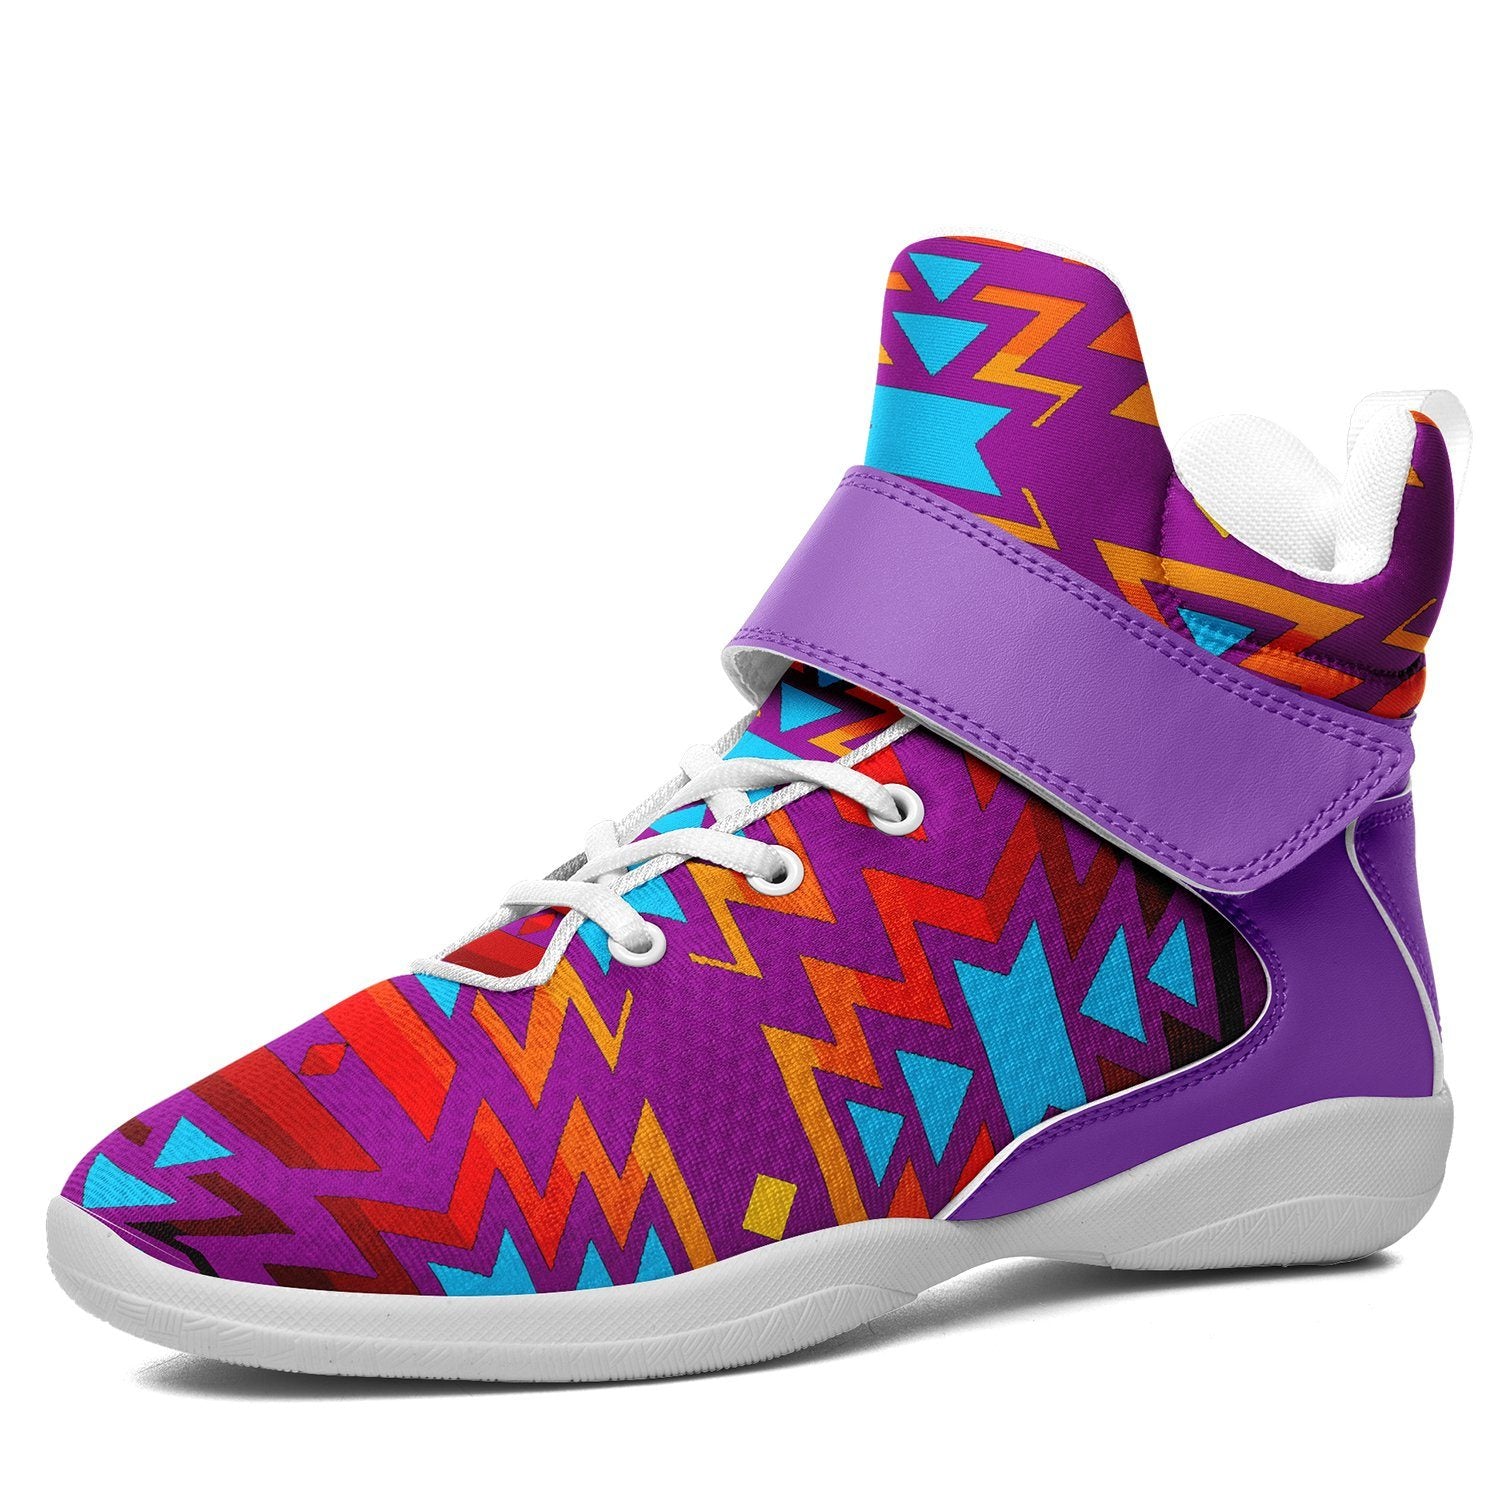 Fire Colors and Turquoise Purple Ipottaa Basketball / Sport High Top Shoes 49 Dzine US Child 12.5 / EUR 30 White Sole with Lavender Strap 